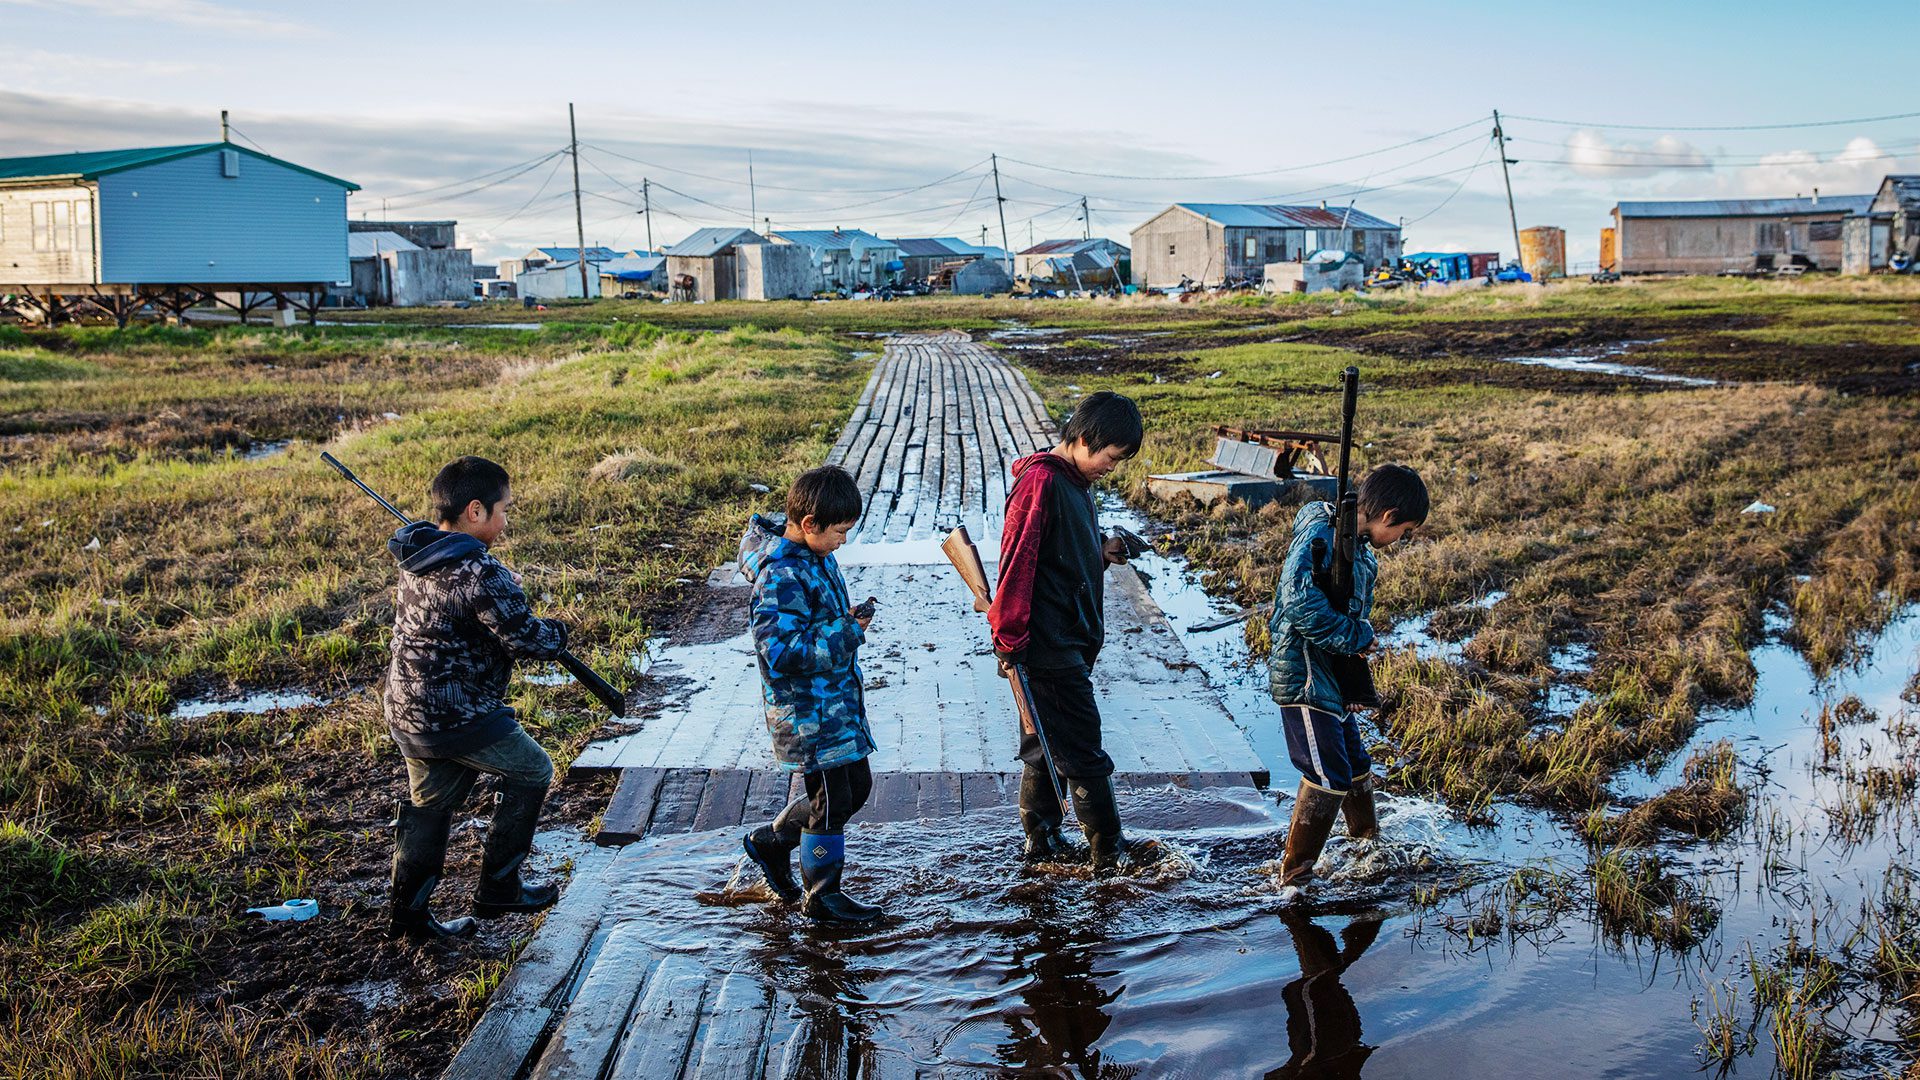 Four boys cross a flooded walkway in the Yip’Ik Village of Newtok, Alaska following a recent bird hunt. They are among the residents now relocating as melting permafrost causes their land to sink between two major rivers and the sea.